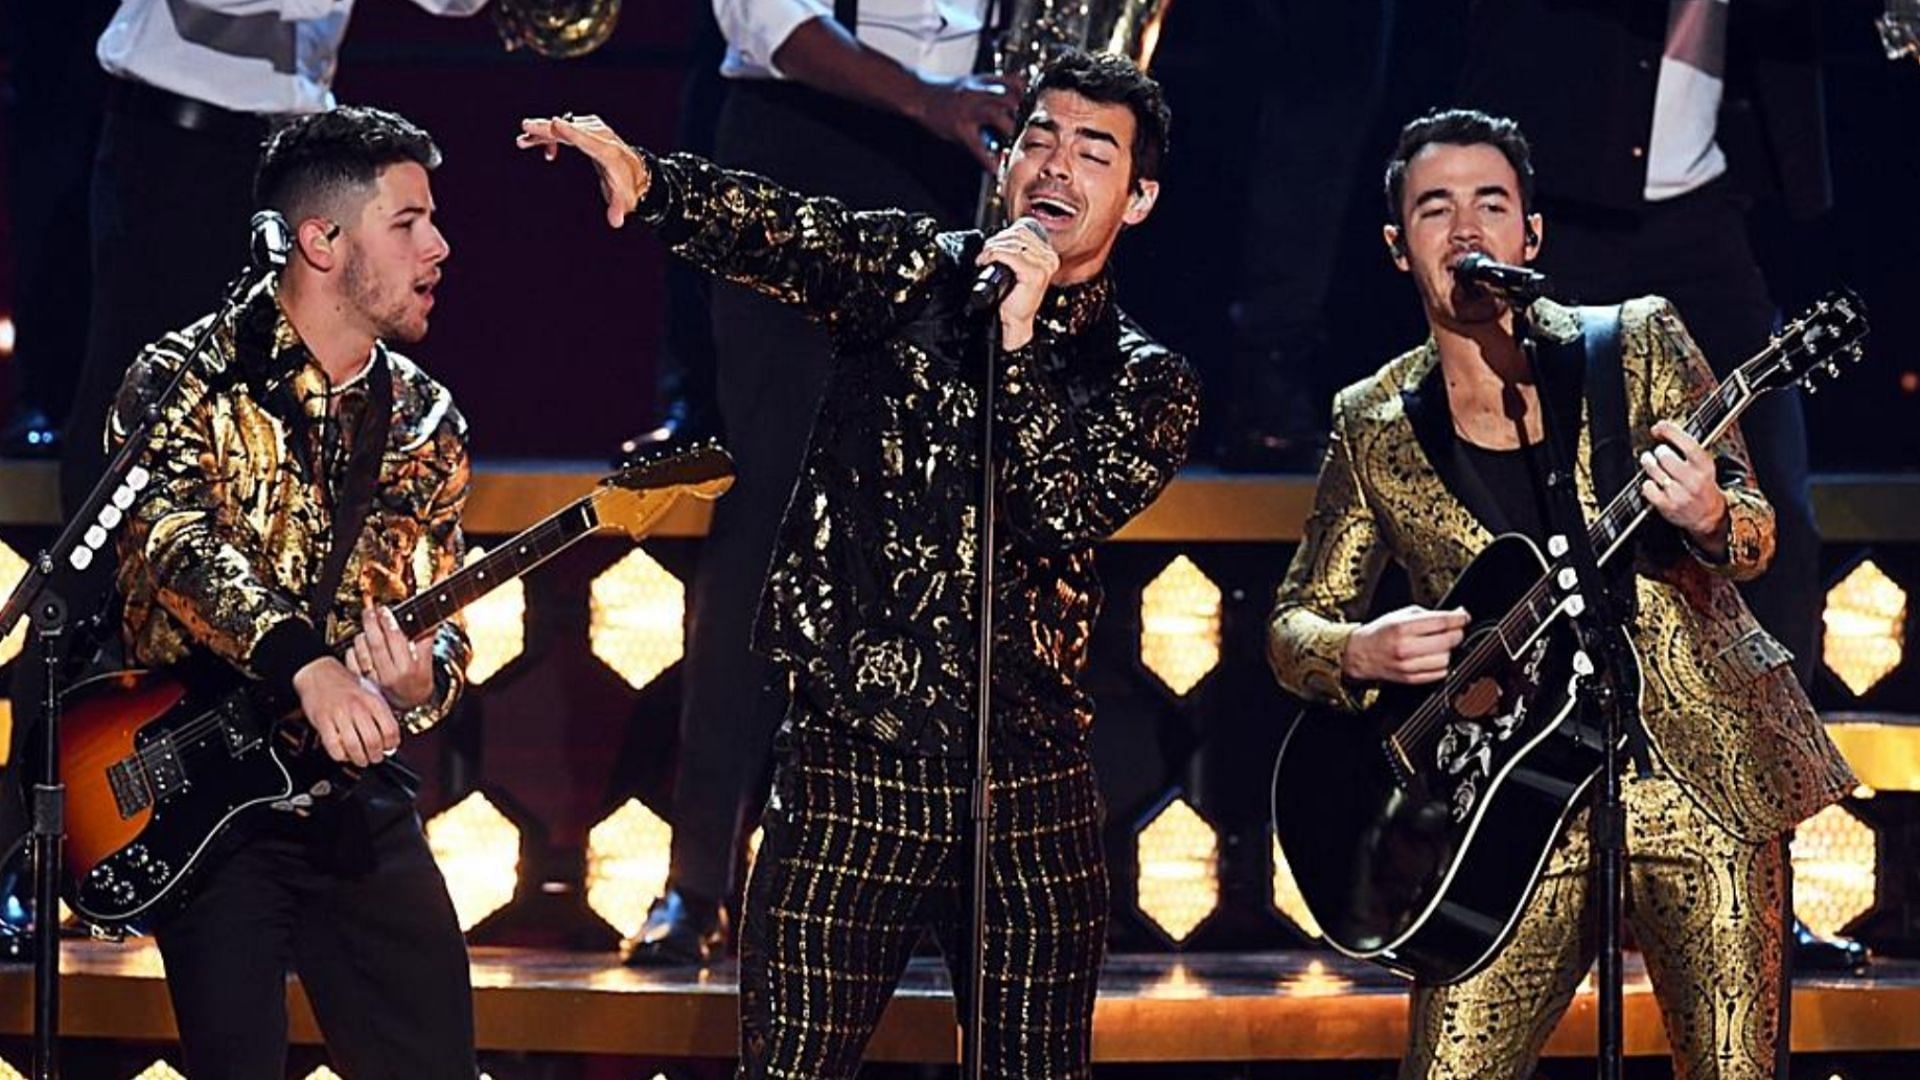 Jonas Brothers have announced a 3-night residency. (Image via Getty)